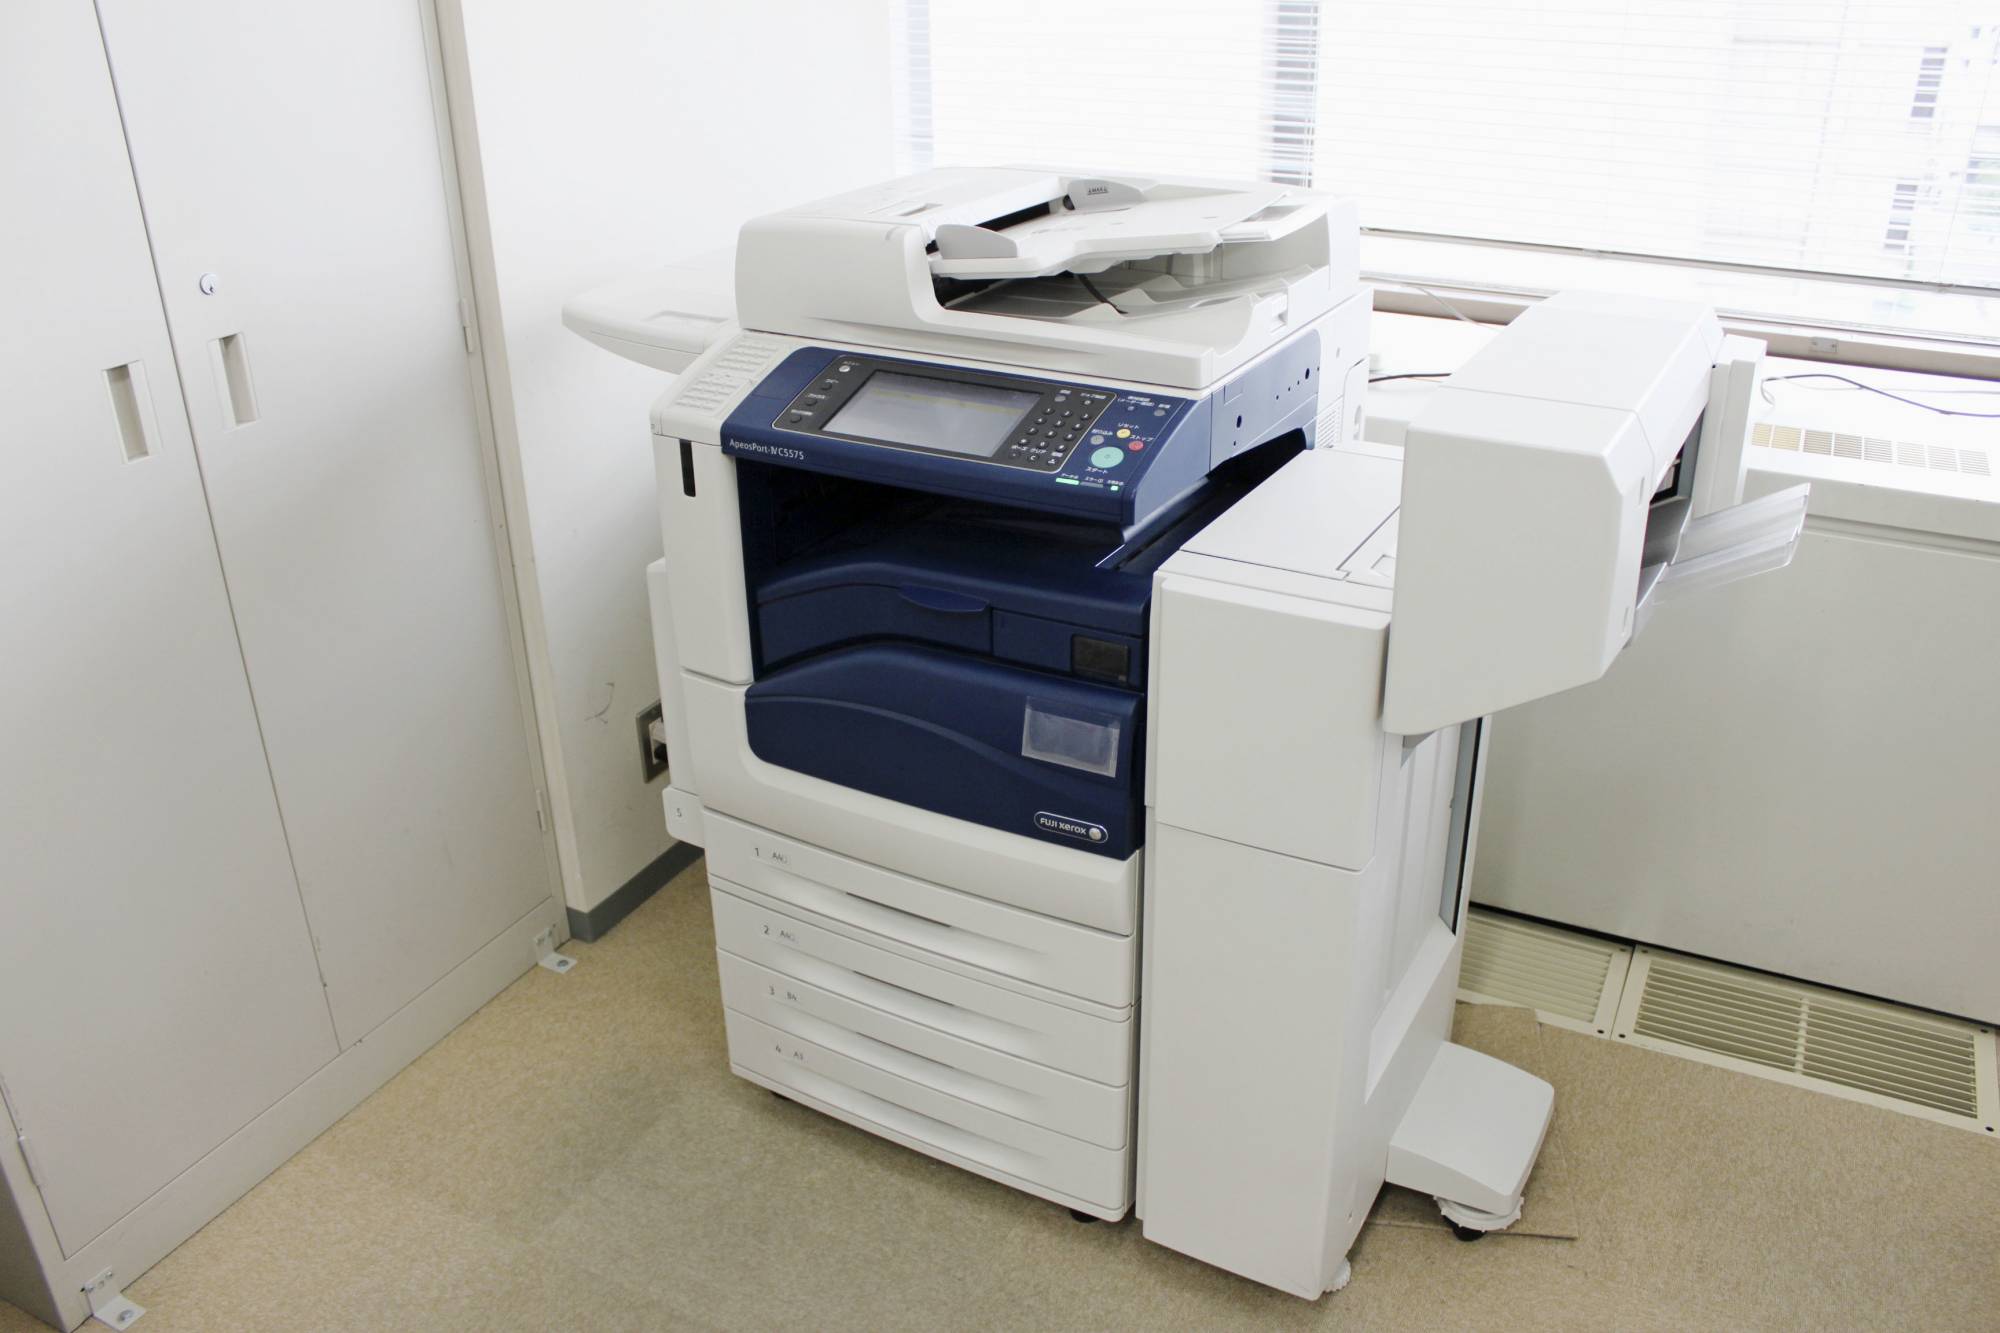 An all-in-one printer, incorporating fax functionality, used to receive tips of bid-rigging from businesses at the Fair Trade Commission in Tokyo in December 2020 | THE FAIR TRADE COMMISSION / VIA KYODO